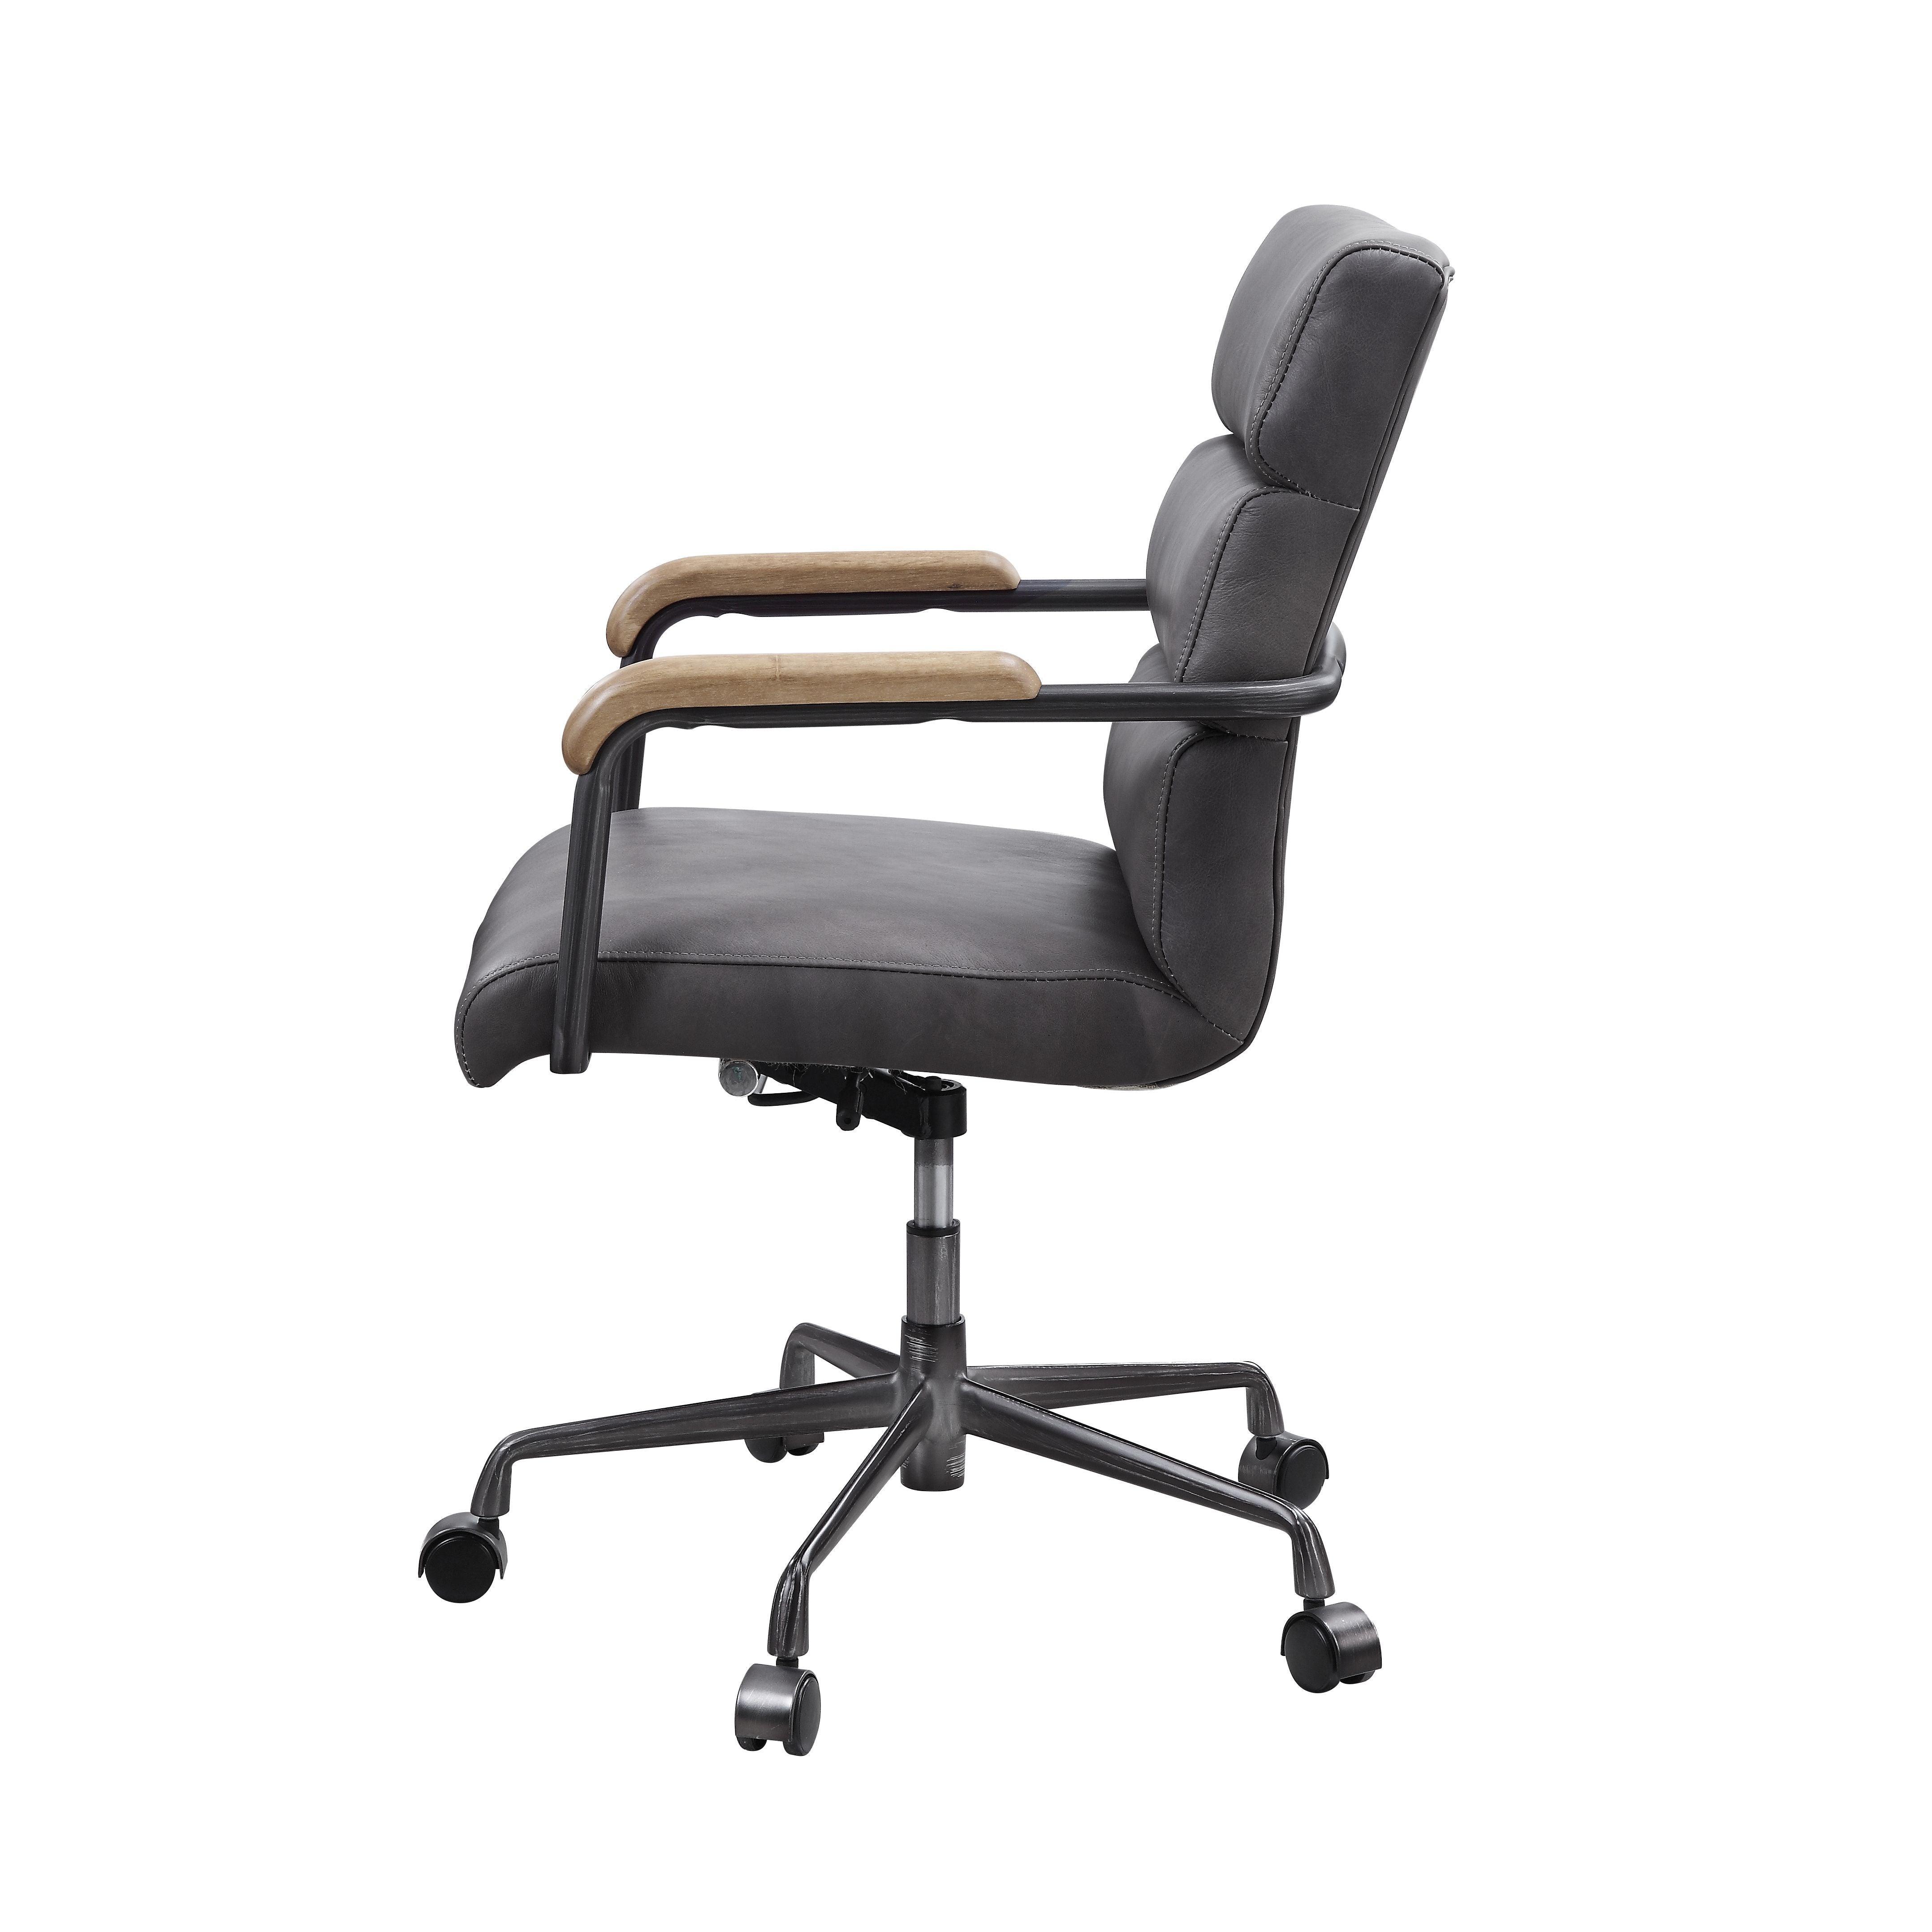 ACME - Halcyon - Office Chair - 5th Avenue Furniture